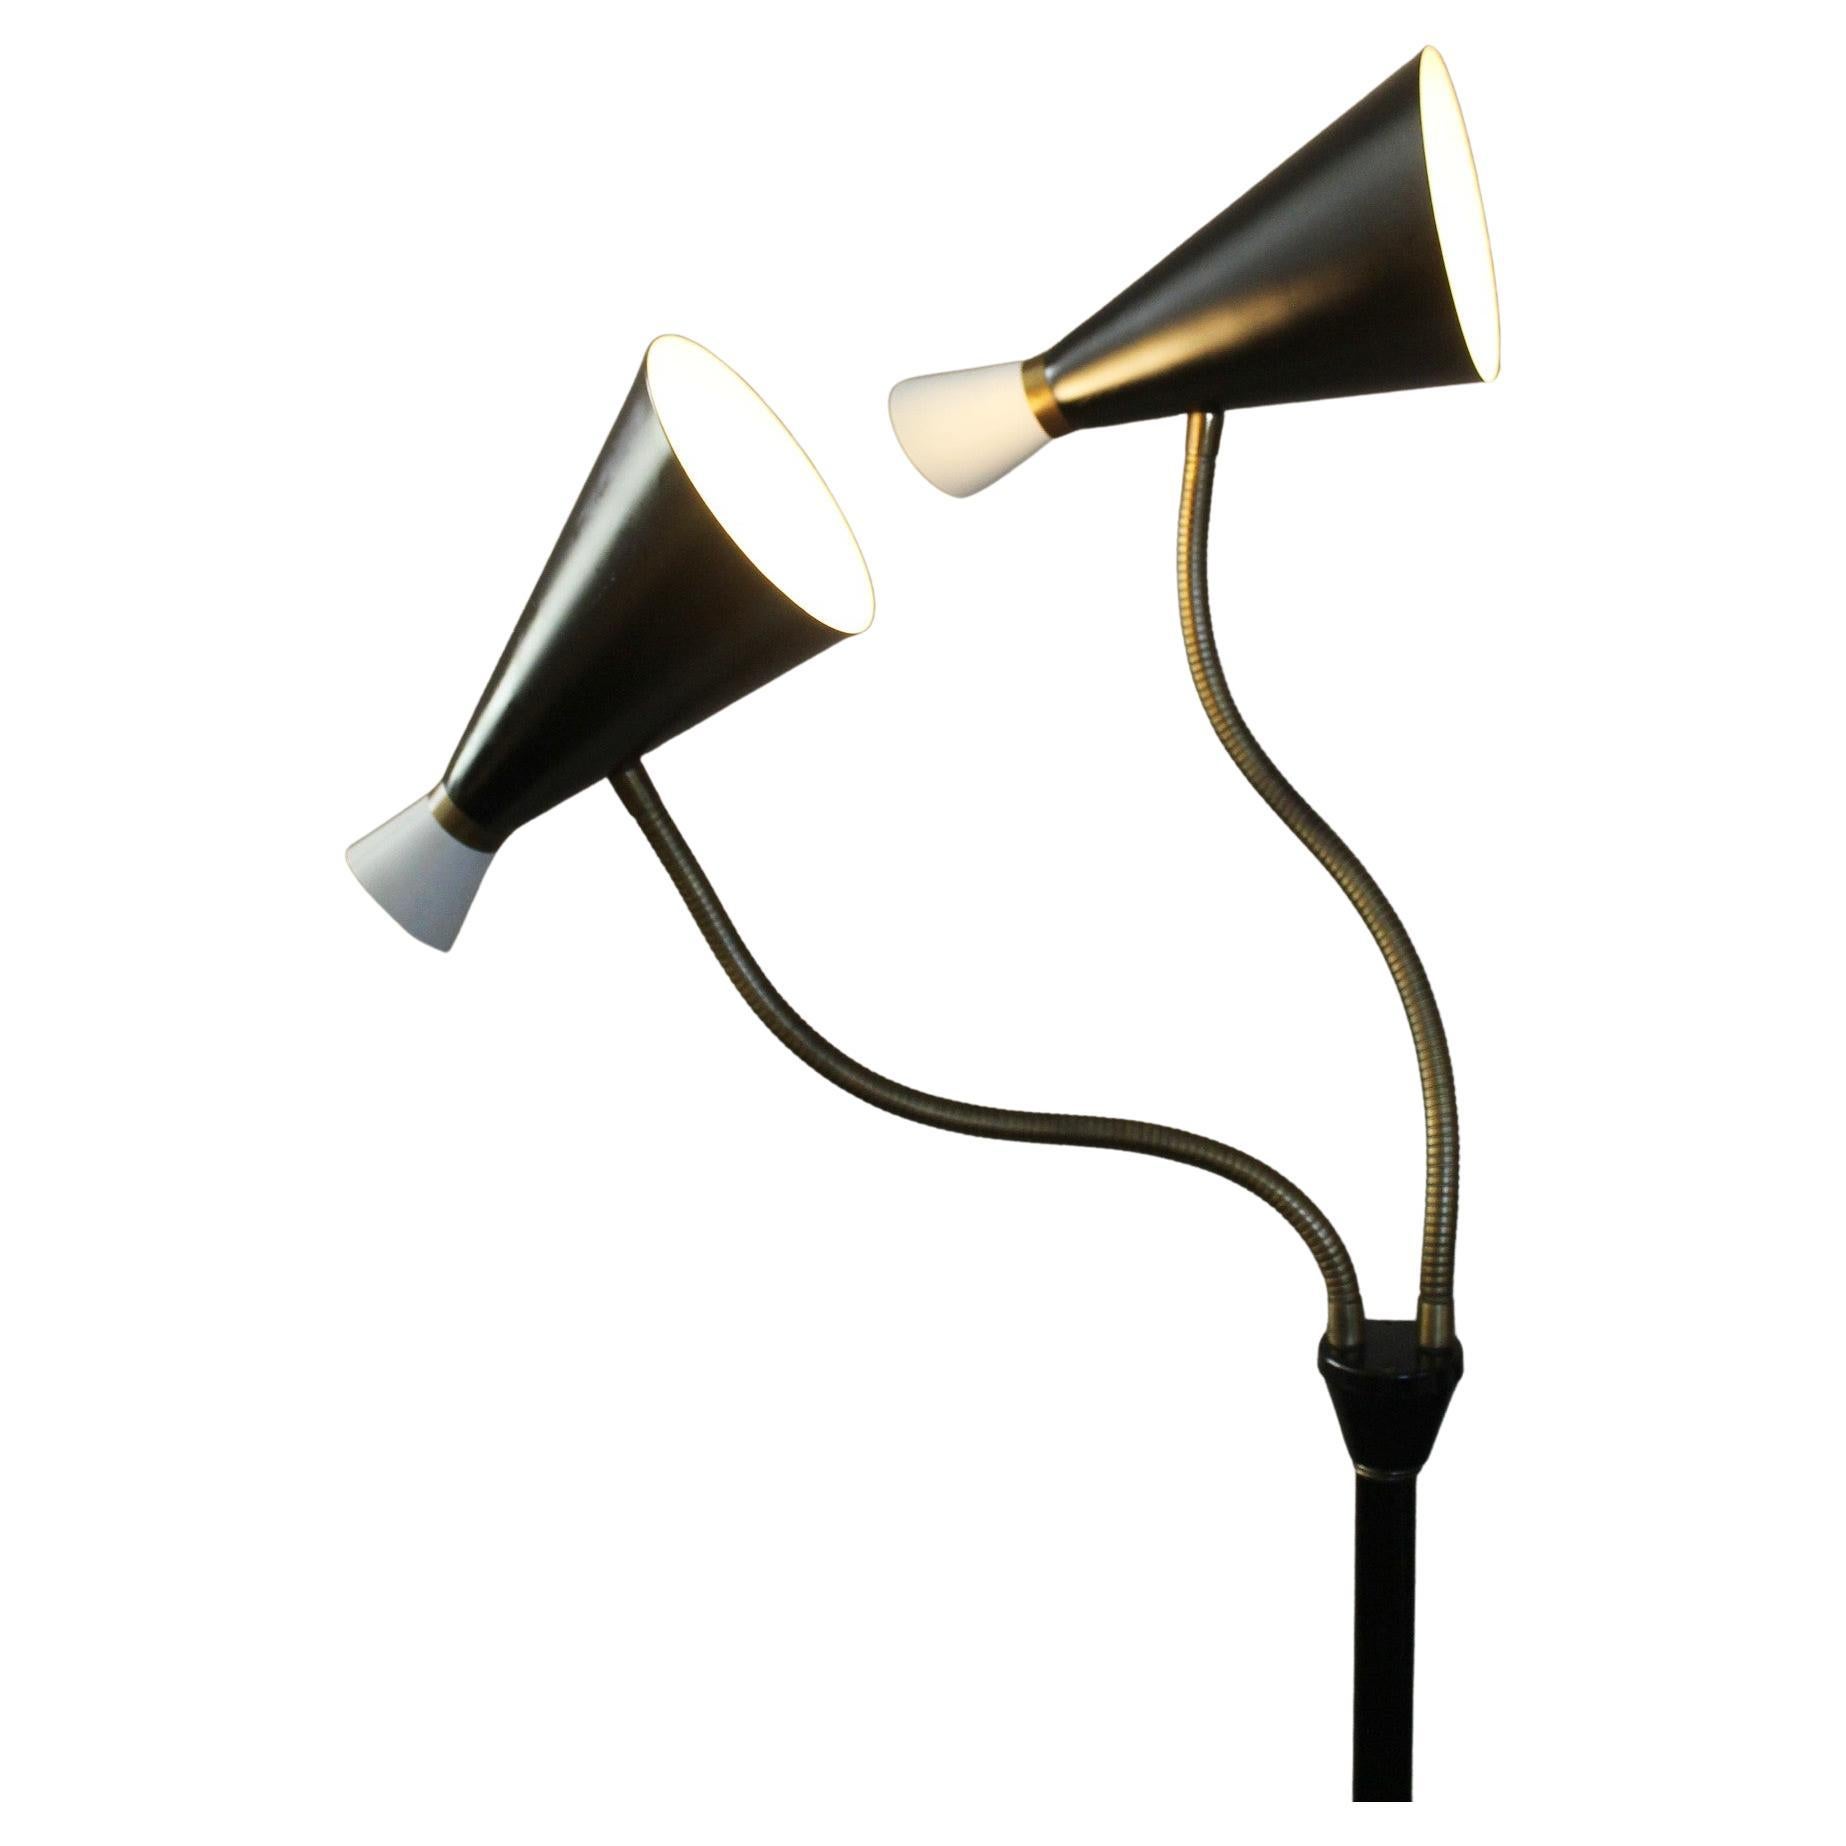 Rare Mid Century Modern Majestic Floor Lamp. Iron Atomic 1950s Dual Cone Shades For Sale